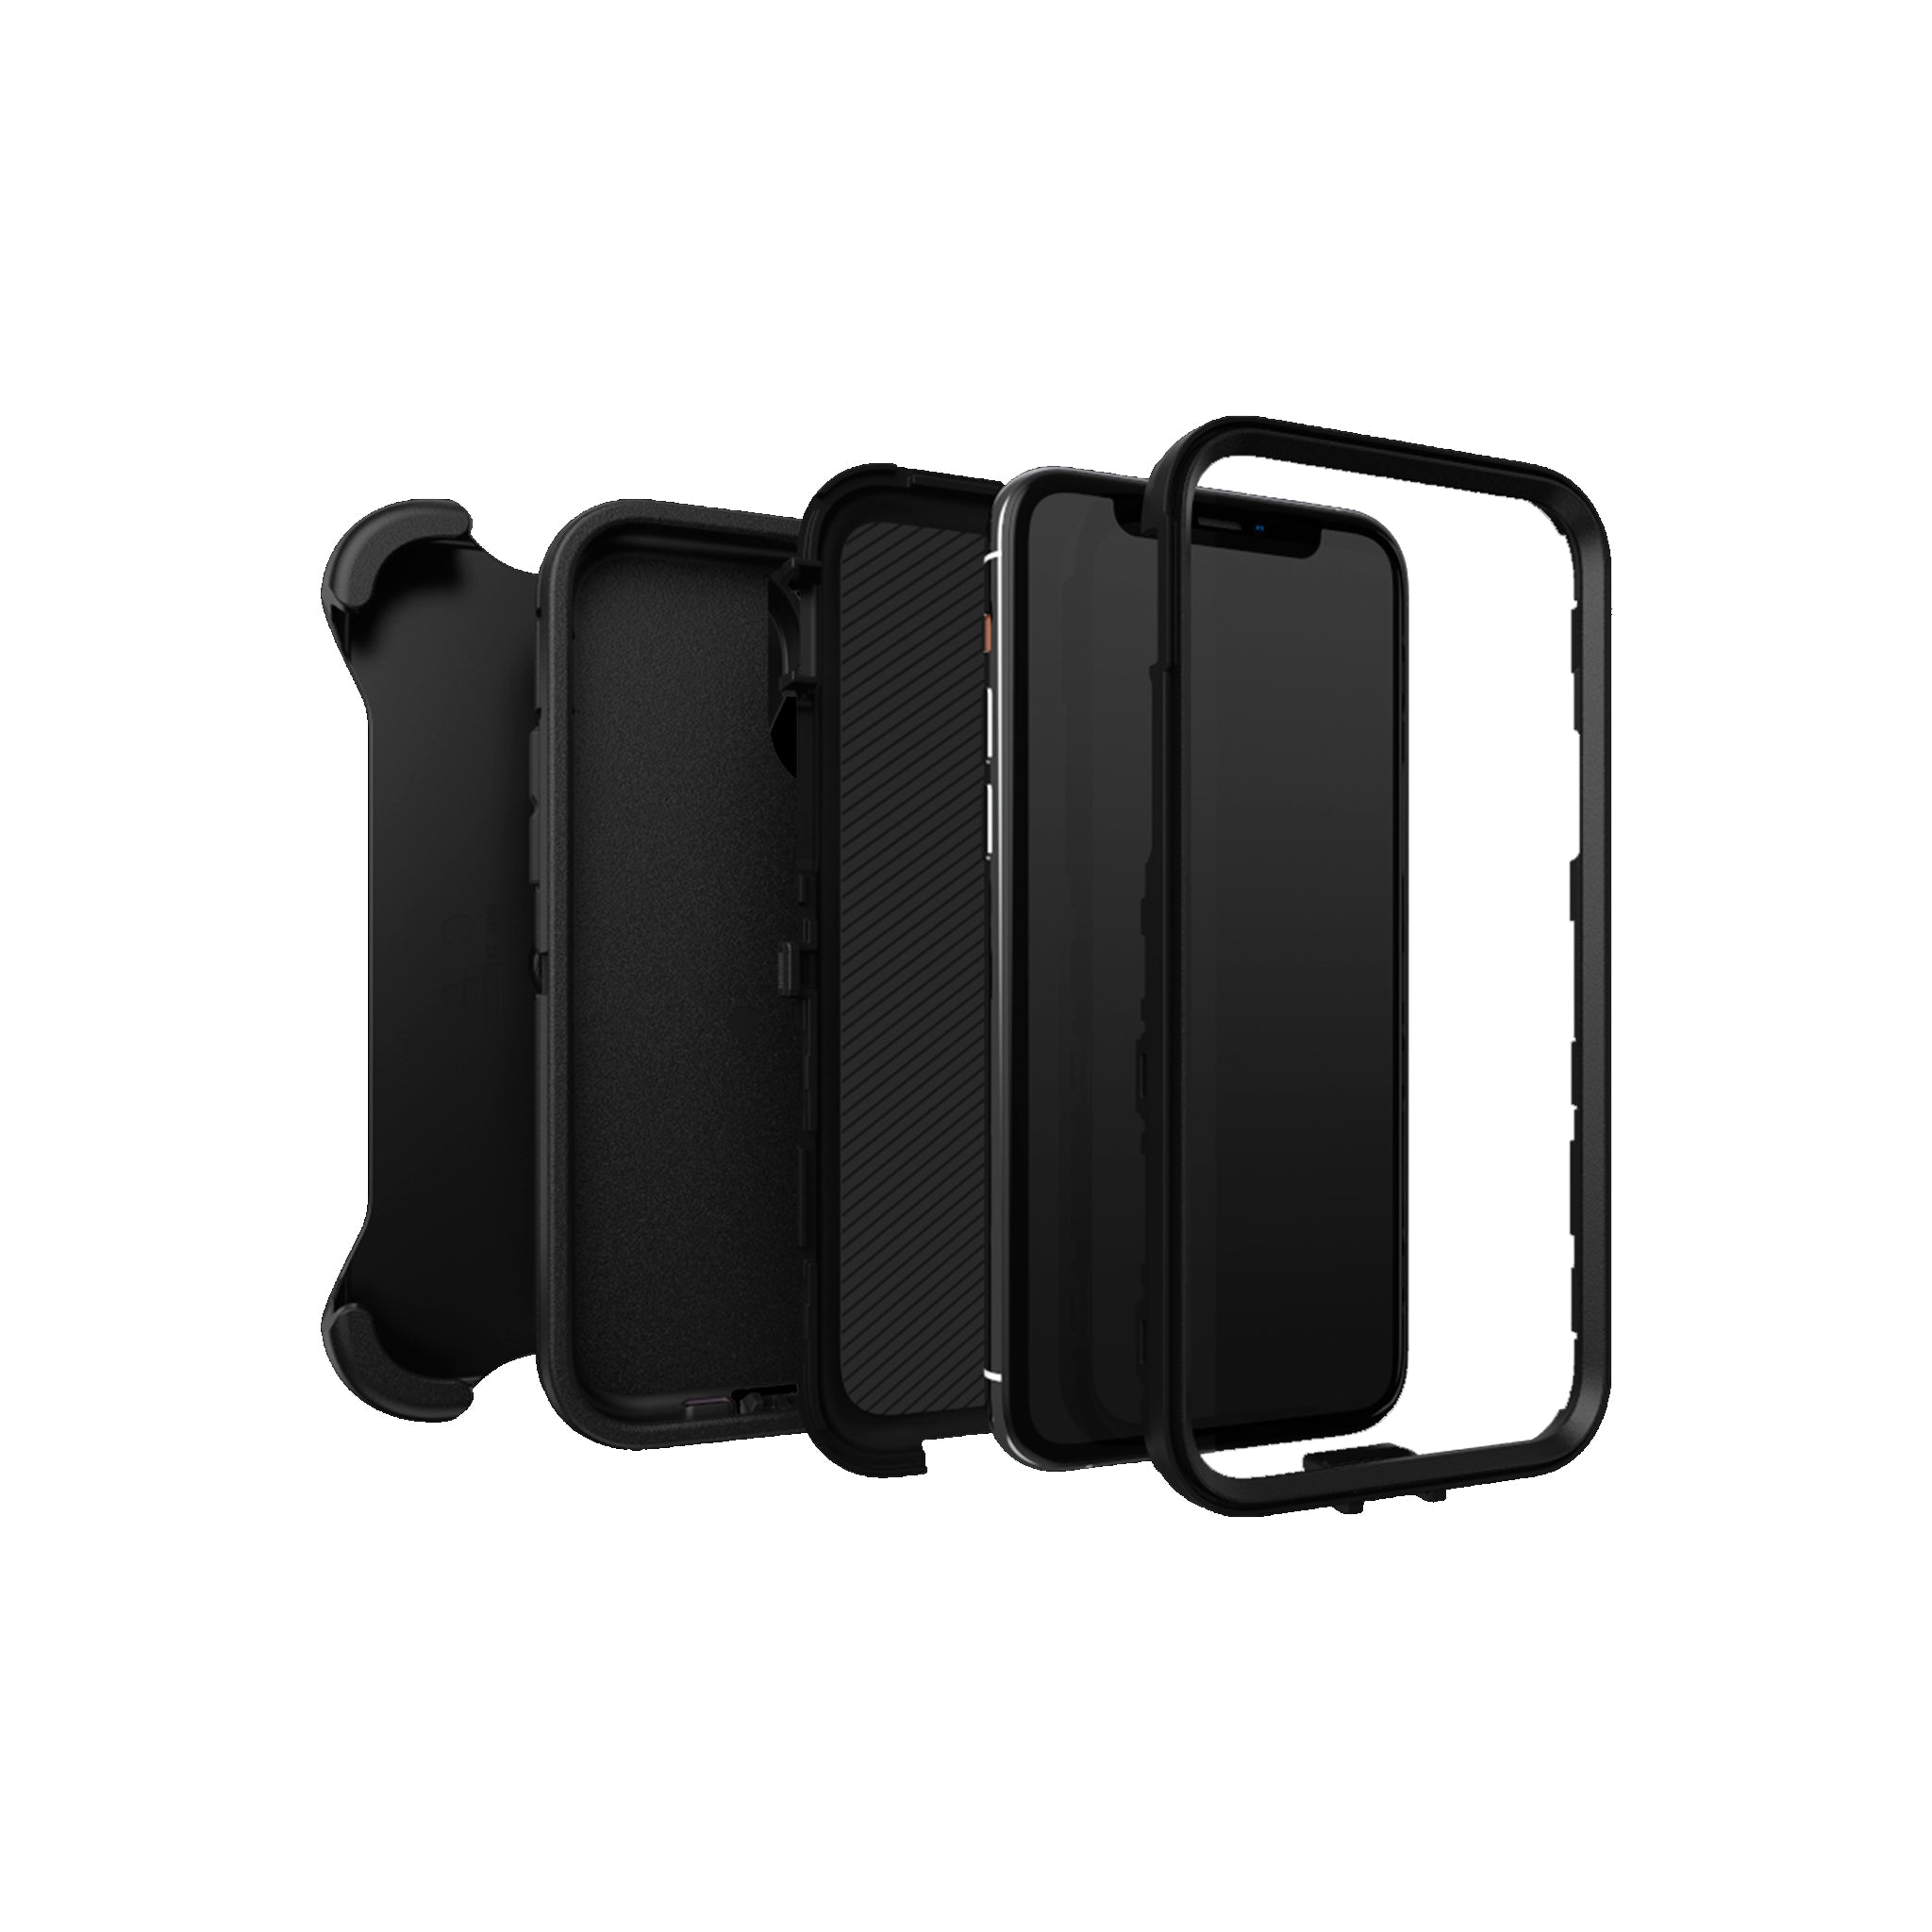 OtterBox - Defender Series Screenless Edition Case for iPhone 11 Pro - Black